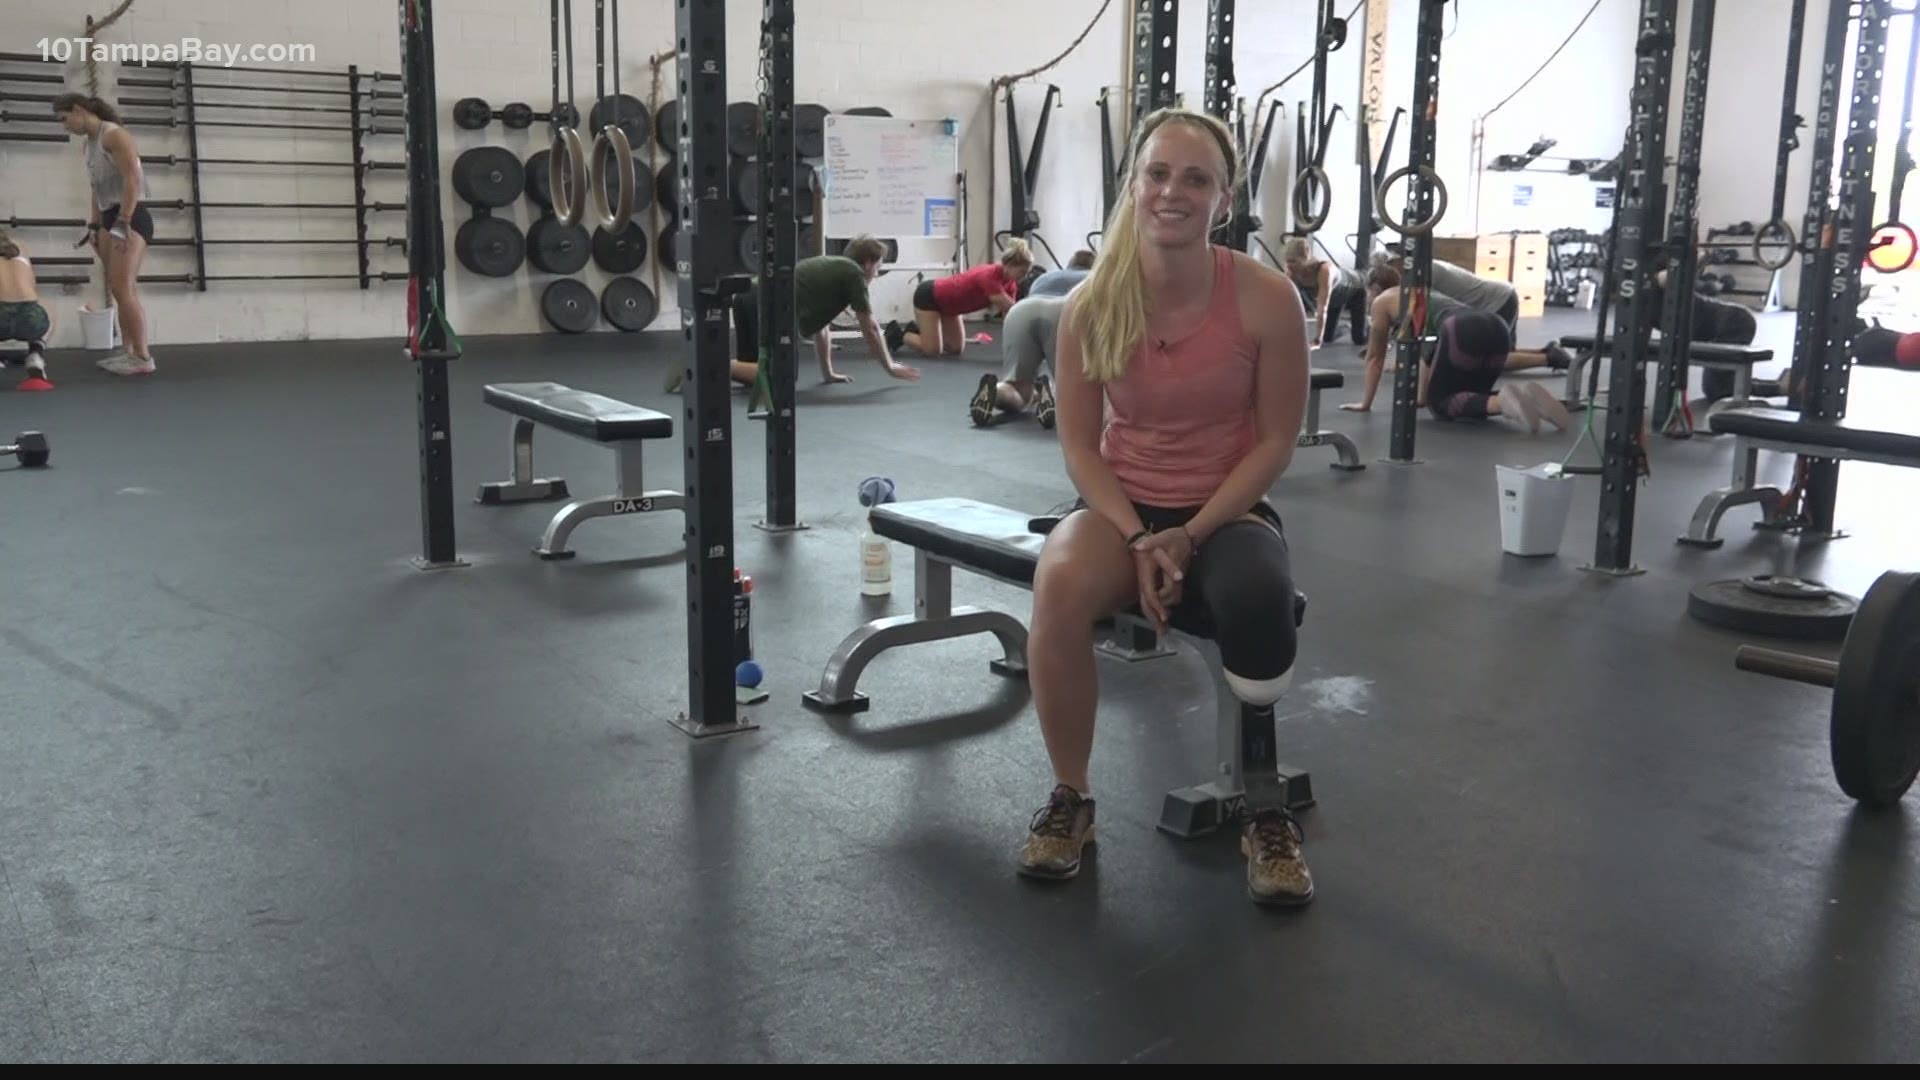 Lexi Youngberg lost her leg in a boating accident as a teen. Now, she's set her sights on competing in the "Super Bowl" of CrossFit.